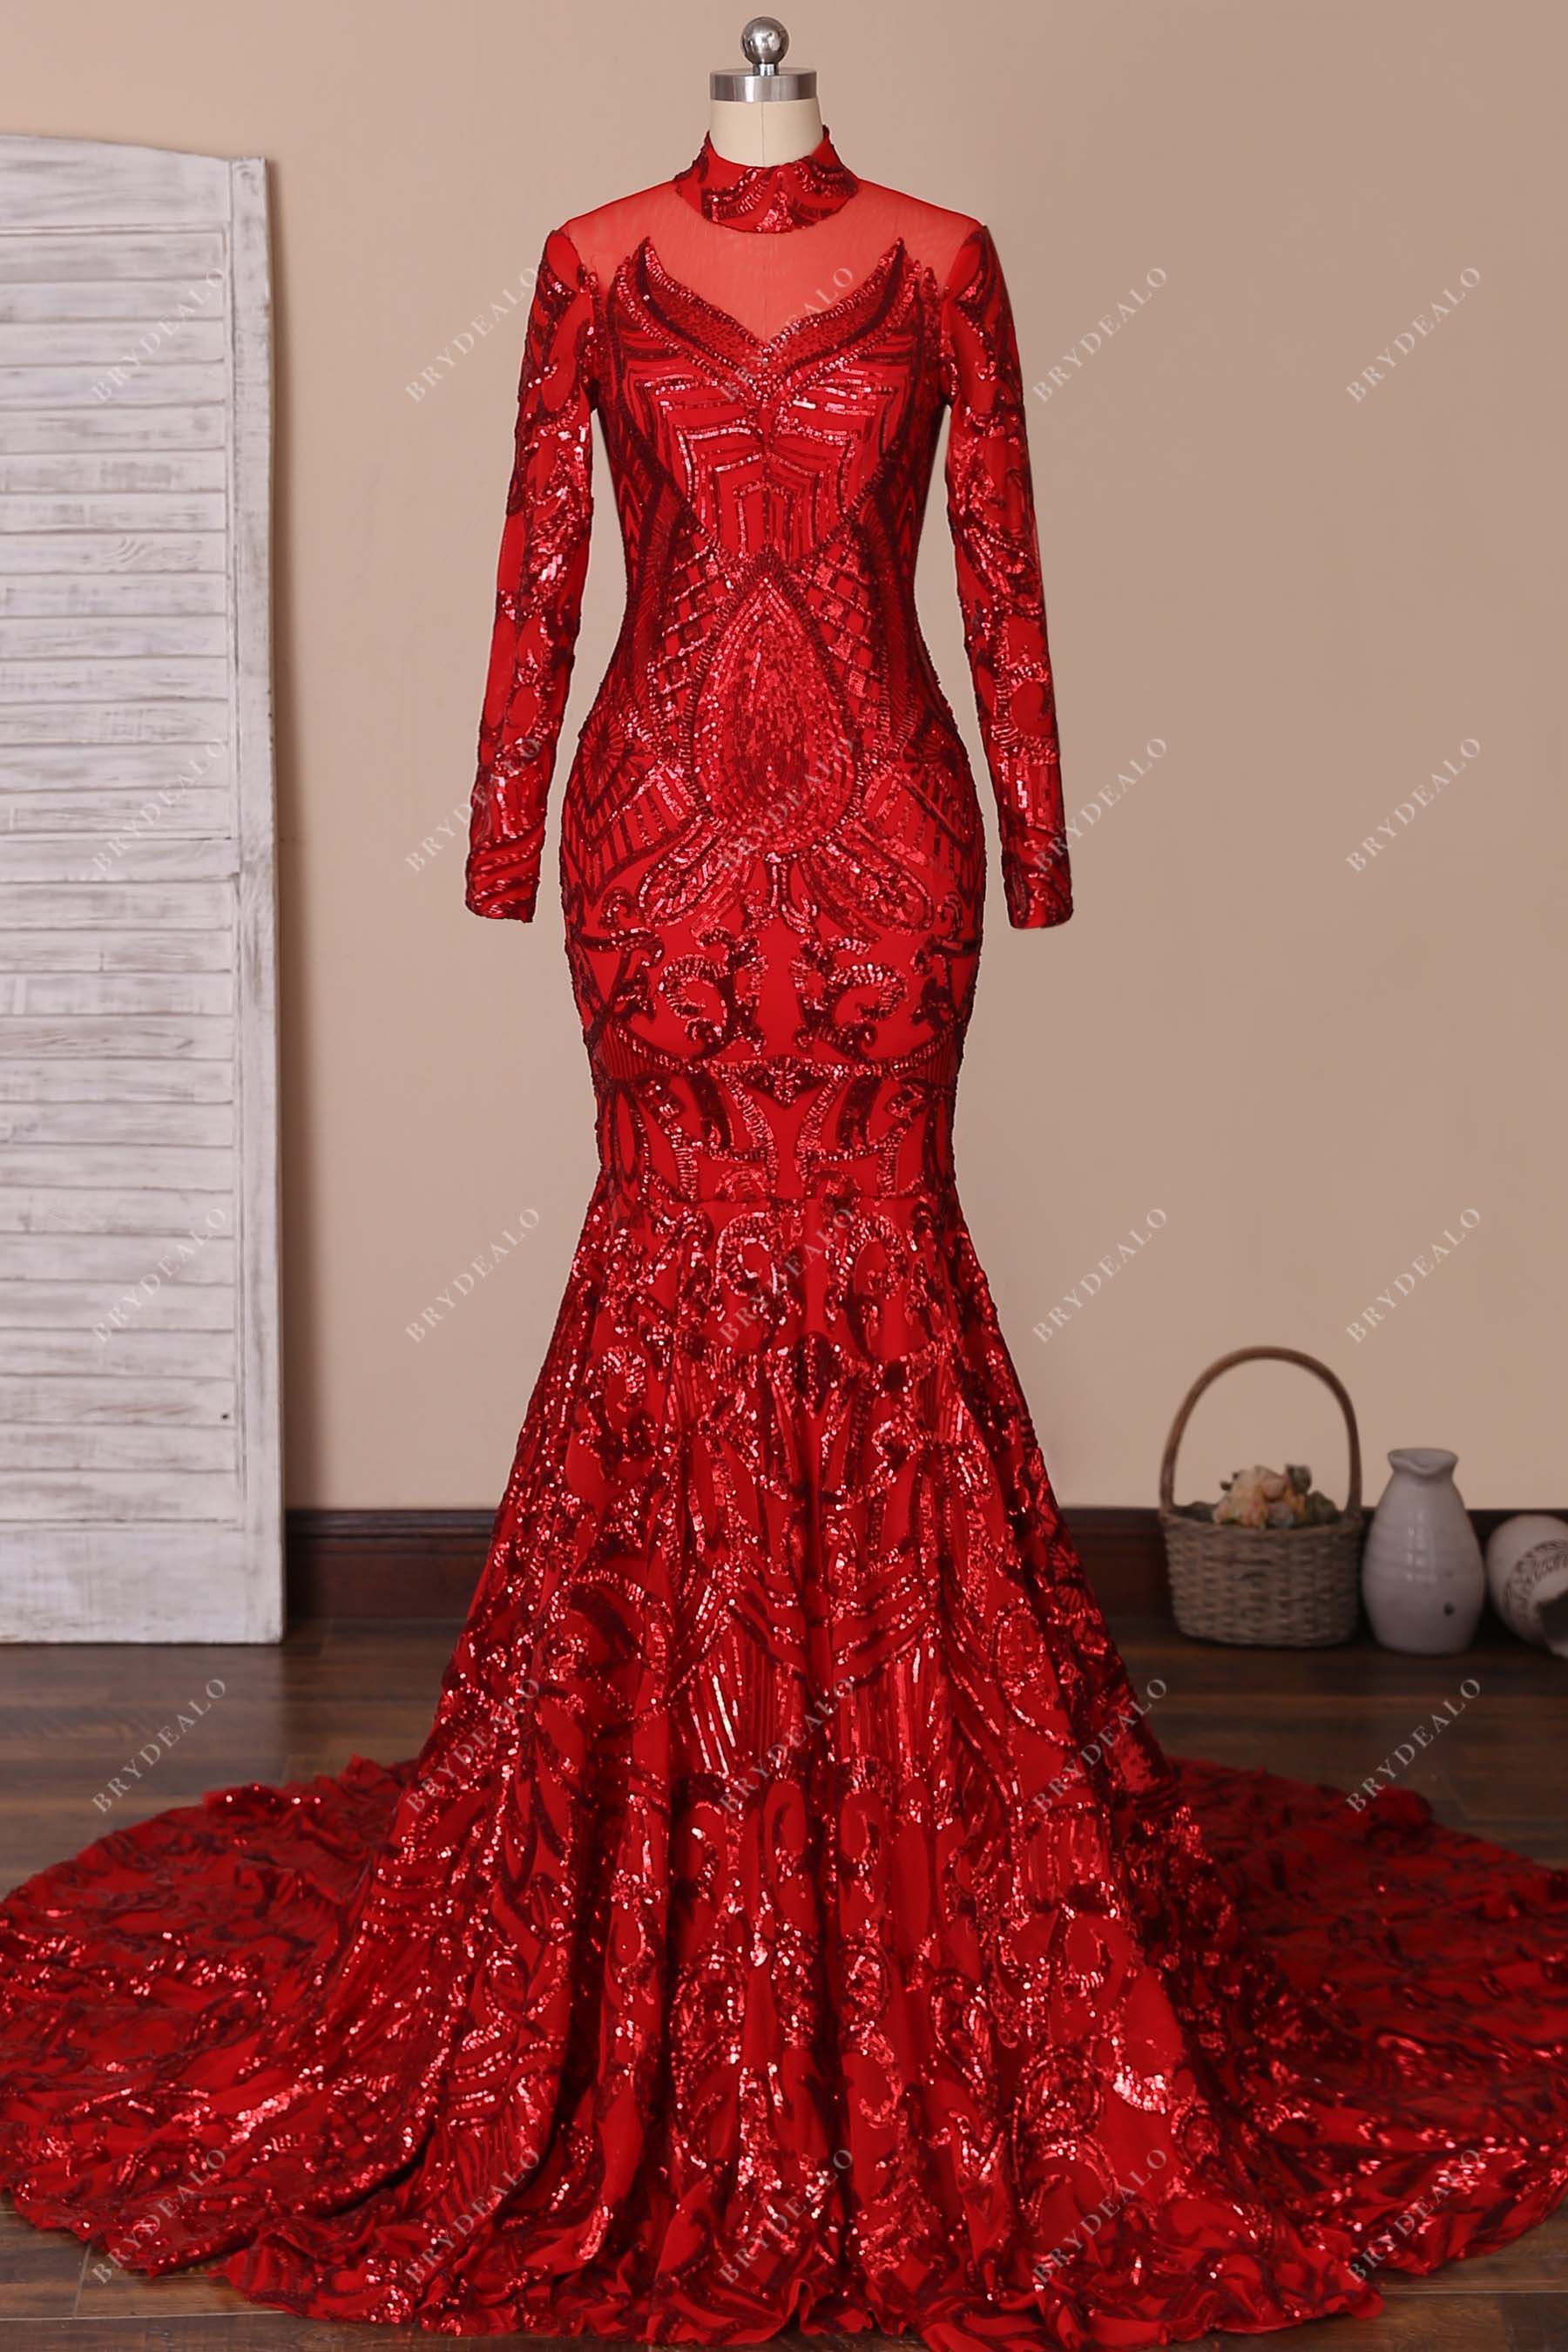 Unique Red Sequin Long Sleeve Mermaid Prom Dress